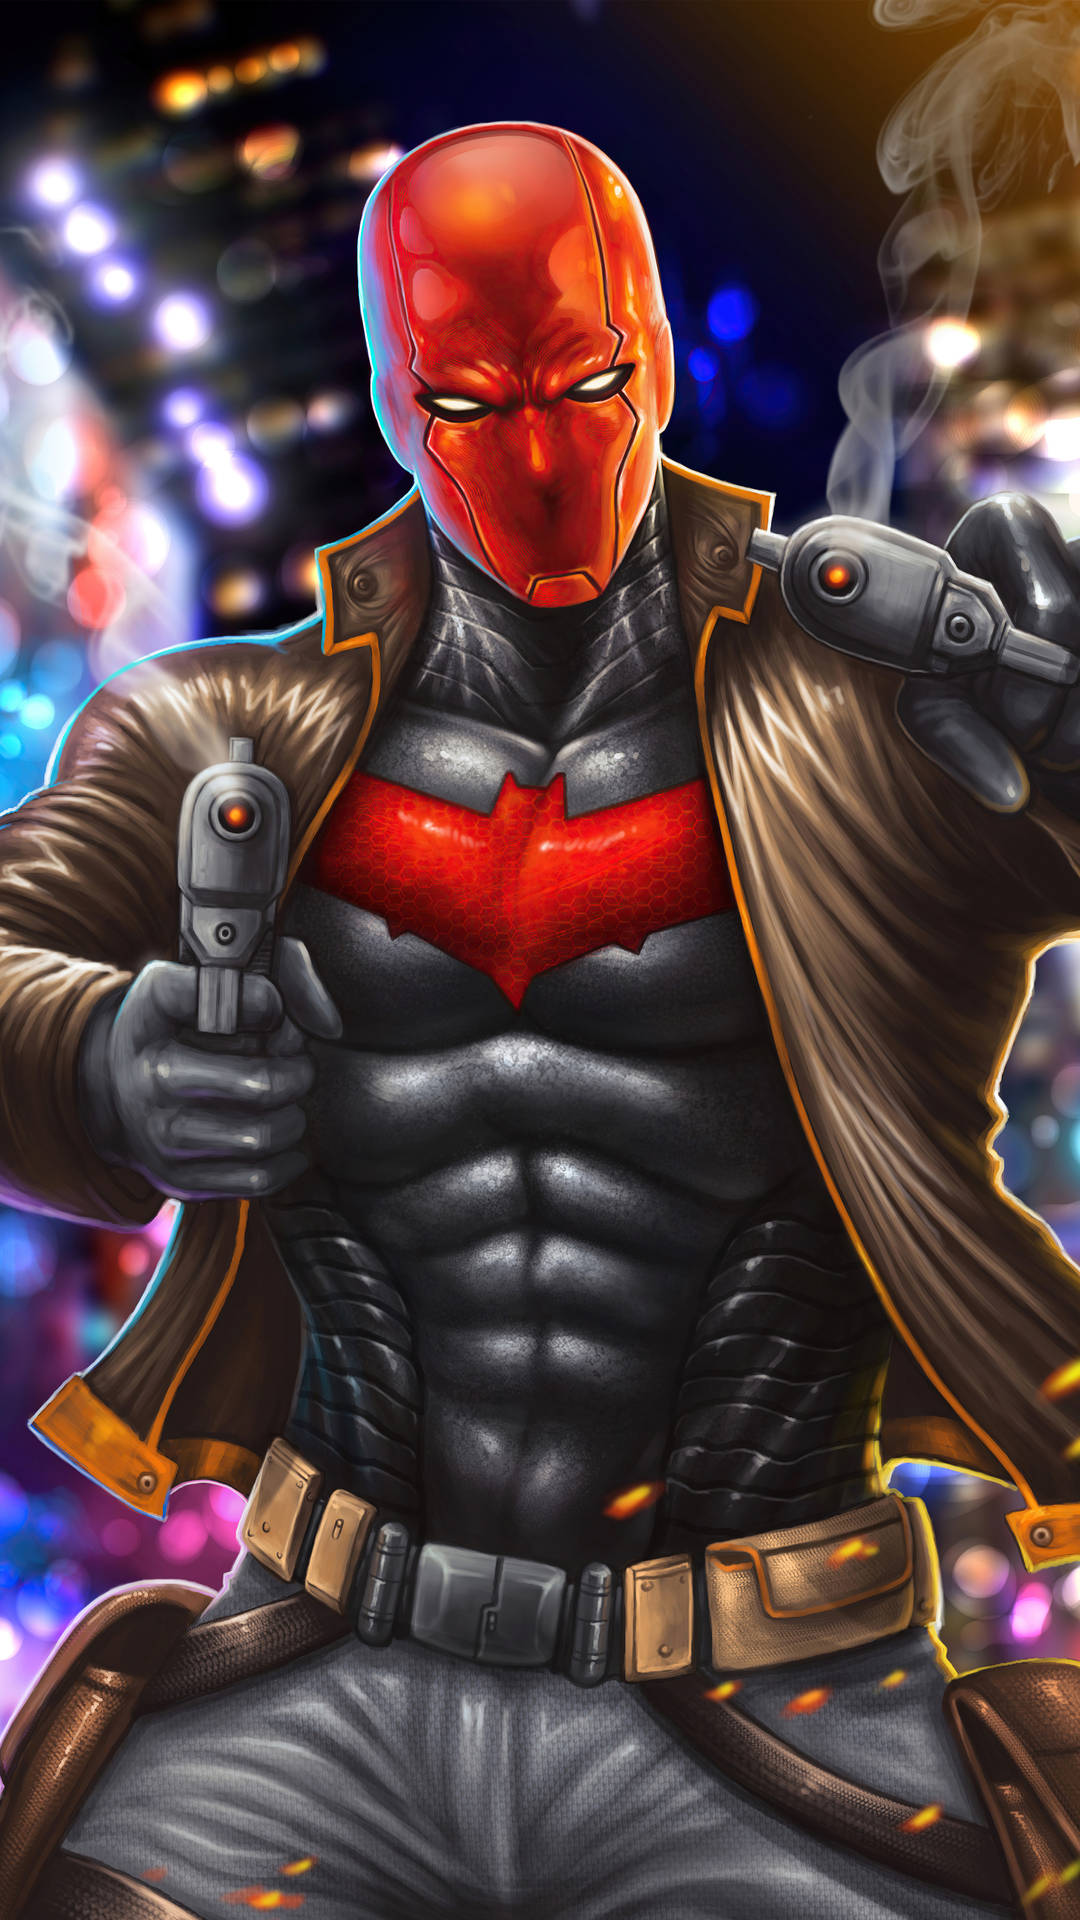 Free Red Hood Wallpaper Downloads, [100+] Red Hood Wallpapers for FREE |  